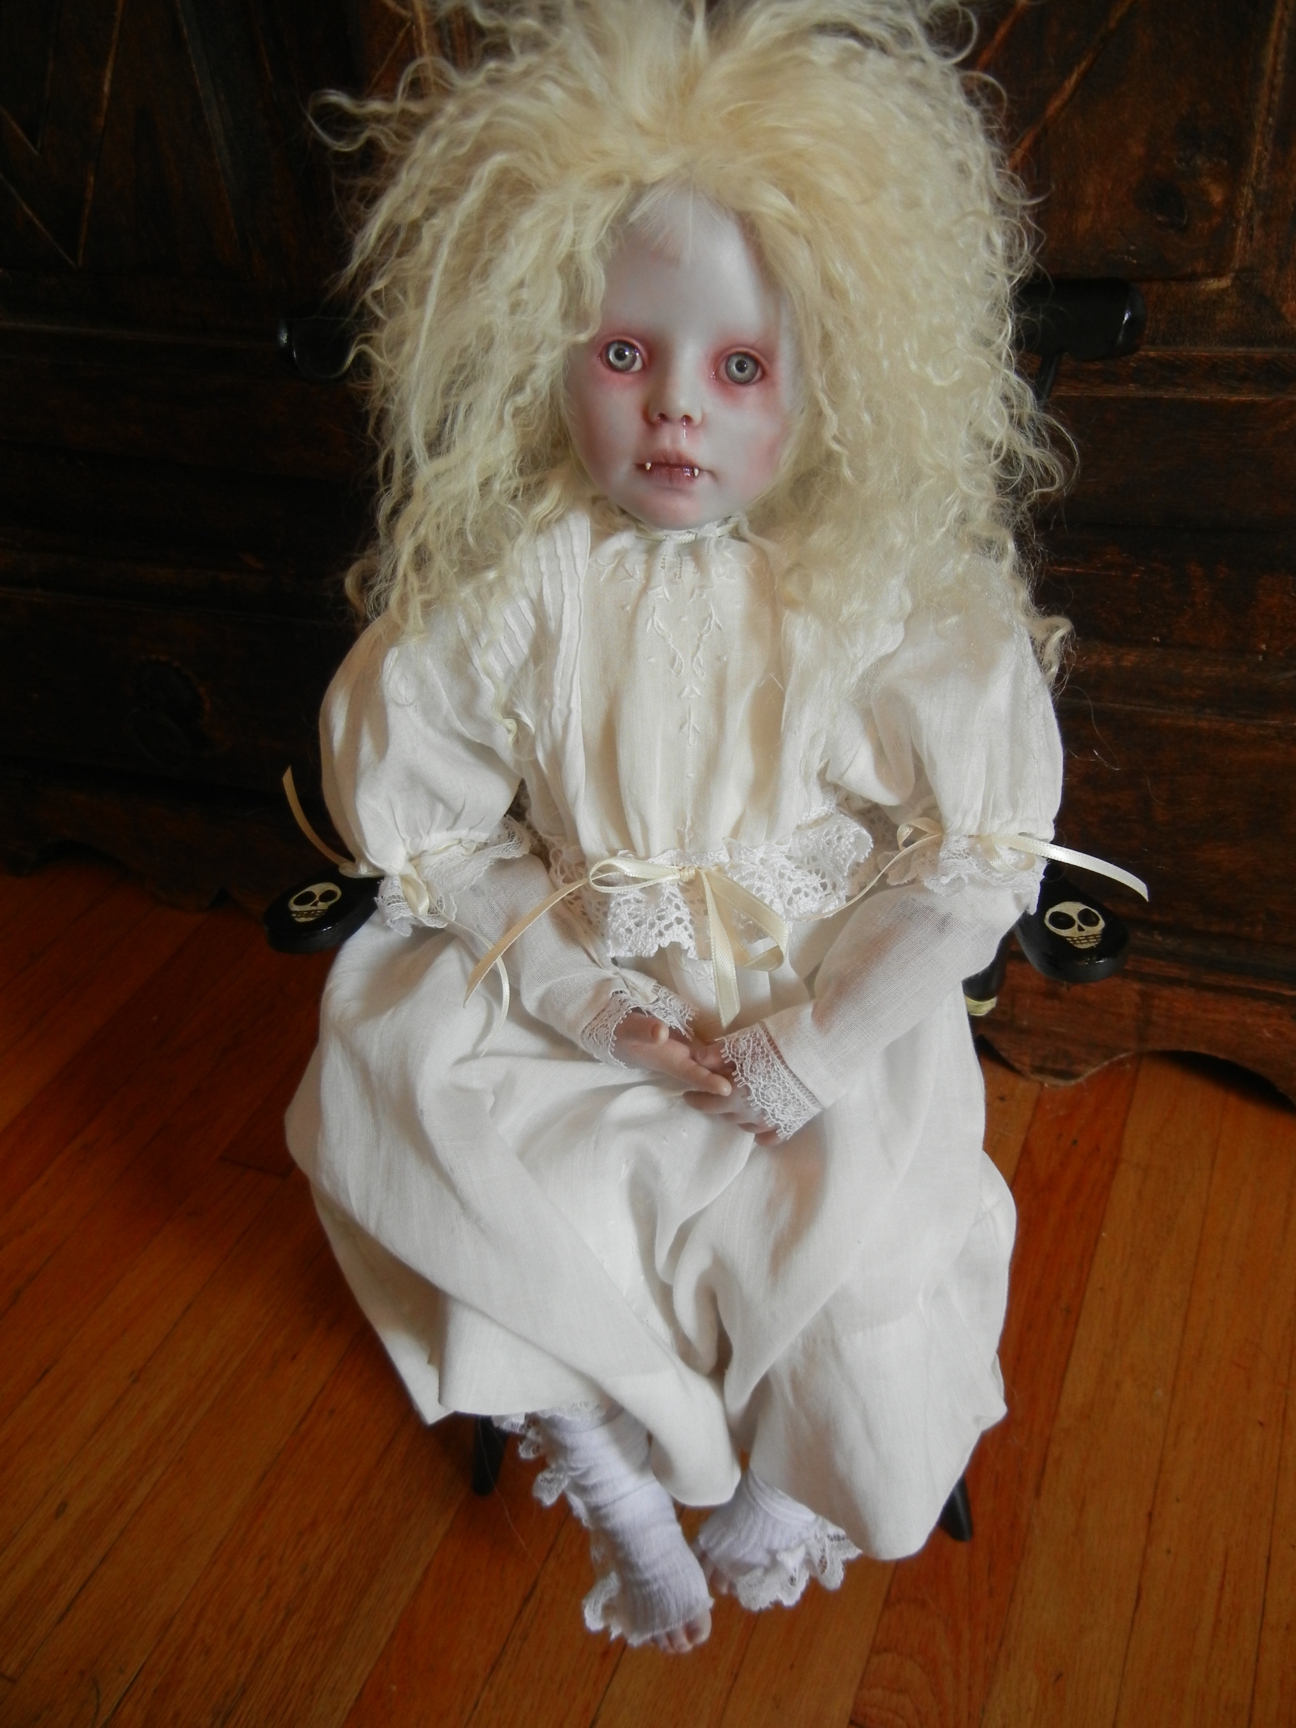 seated gothic vampire artdoll with white blond hair and fangs in a white nightgown